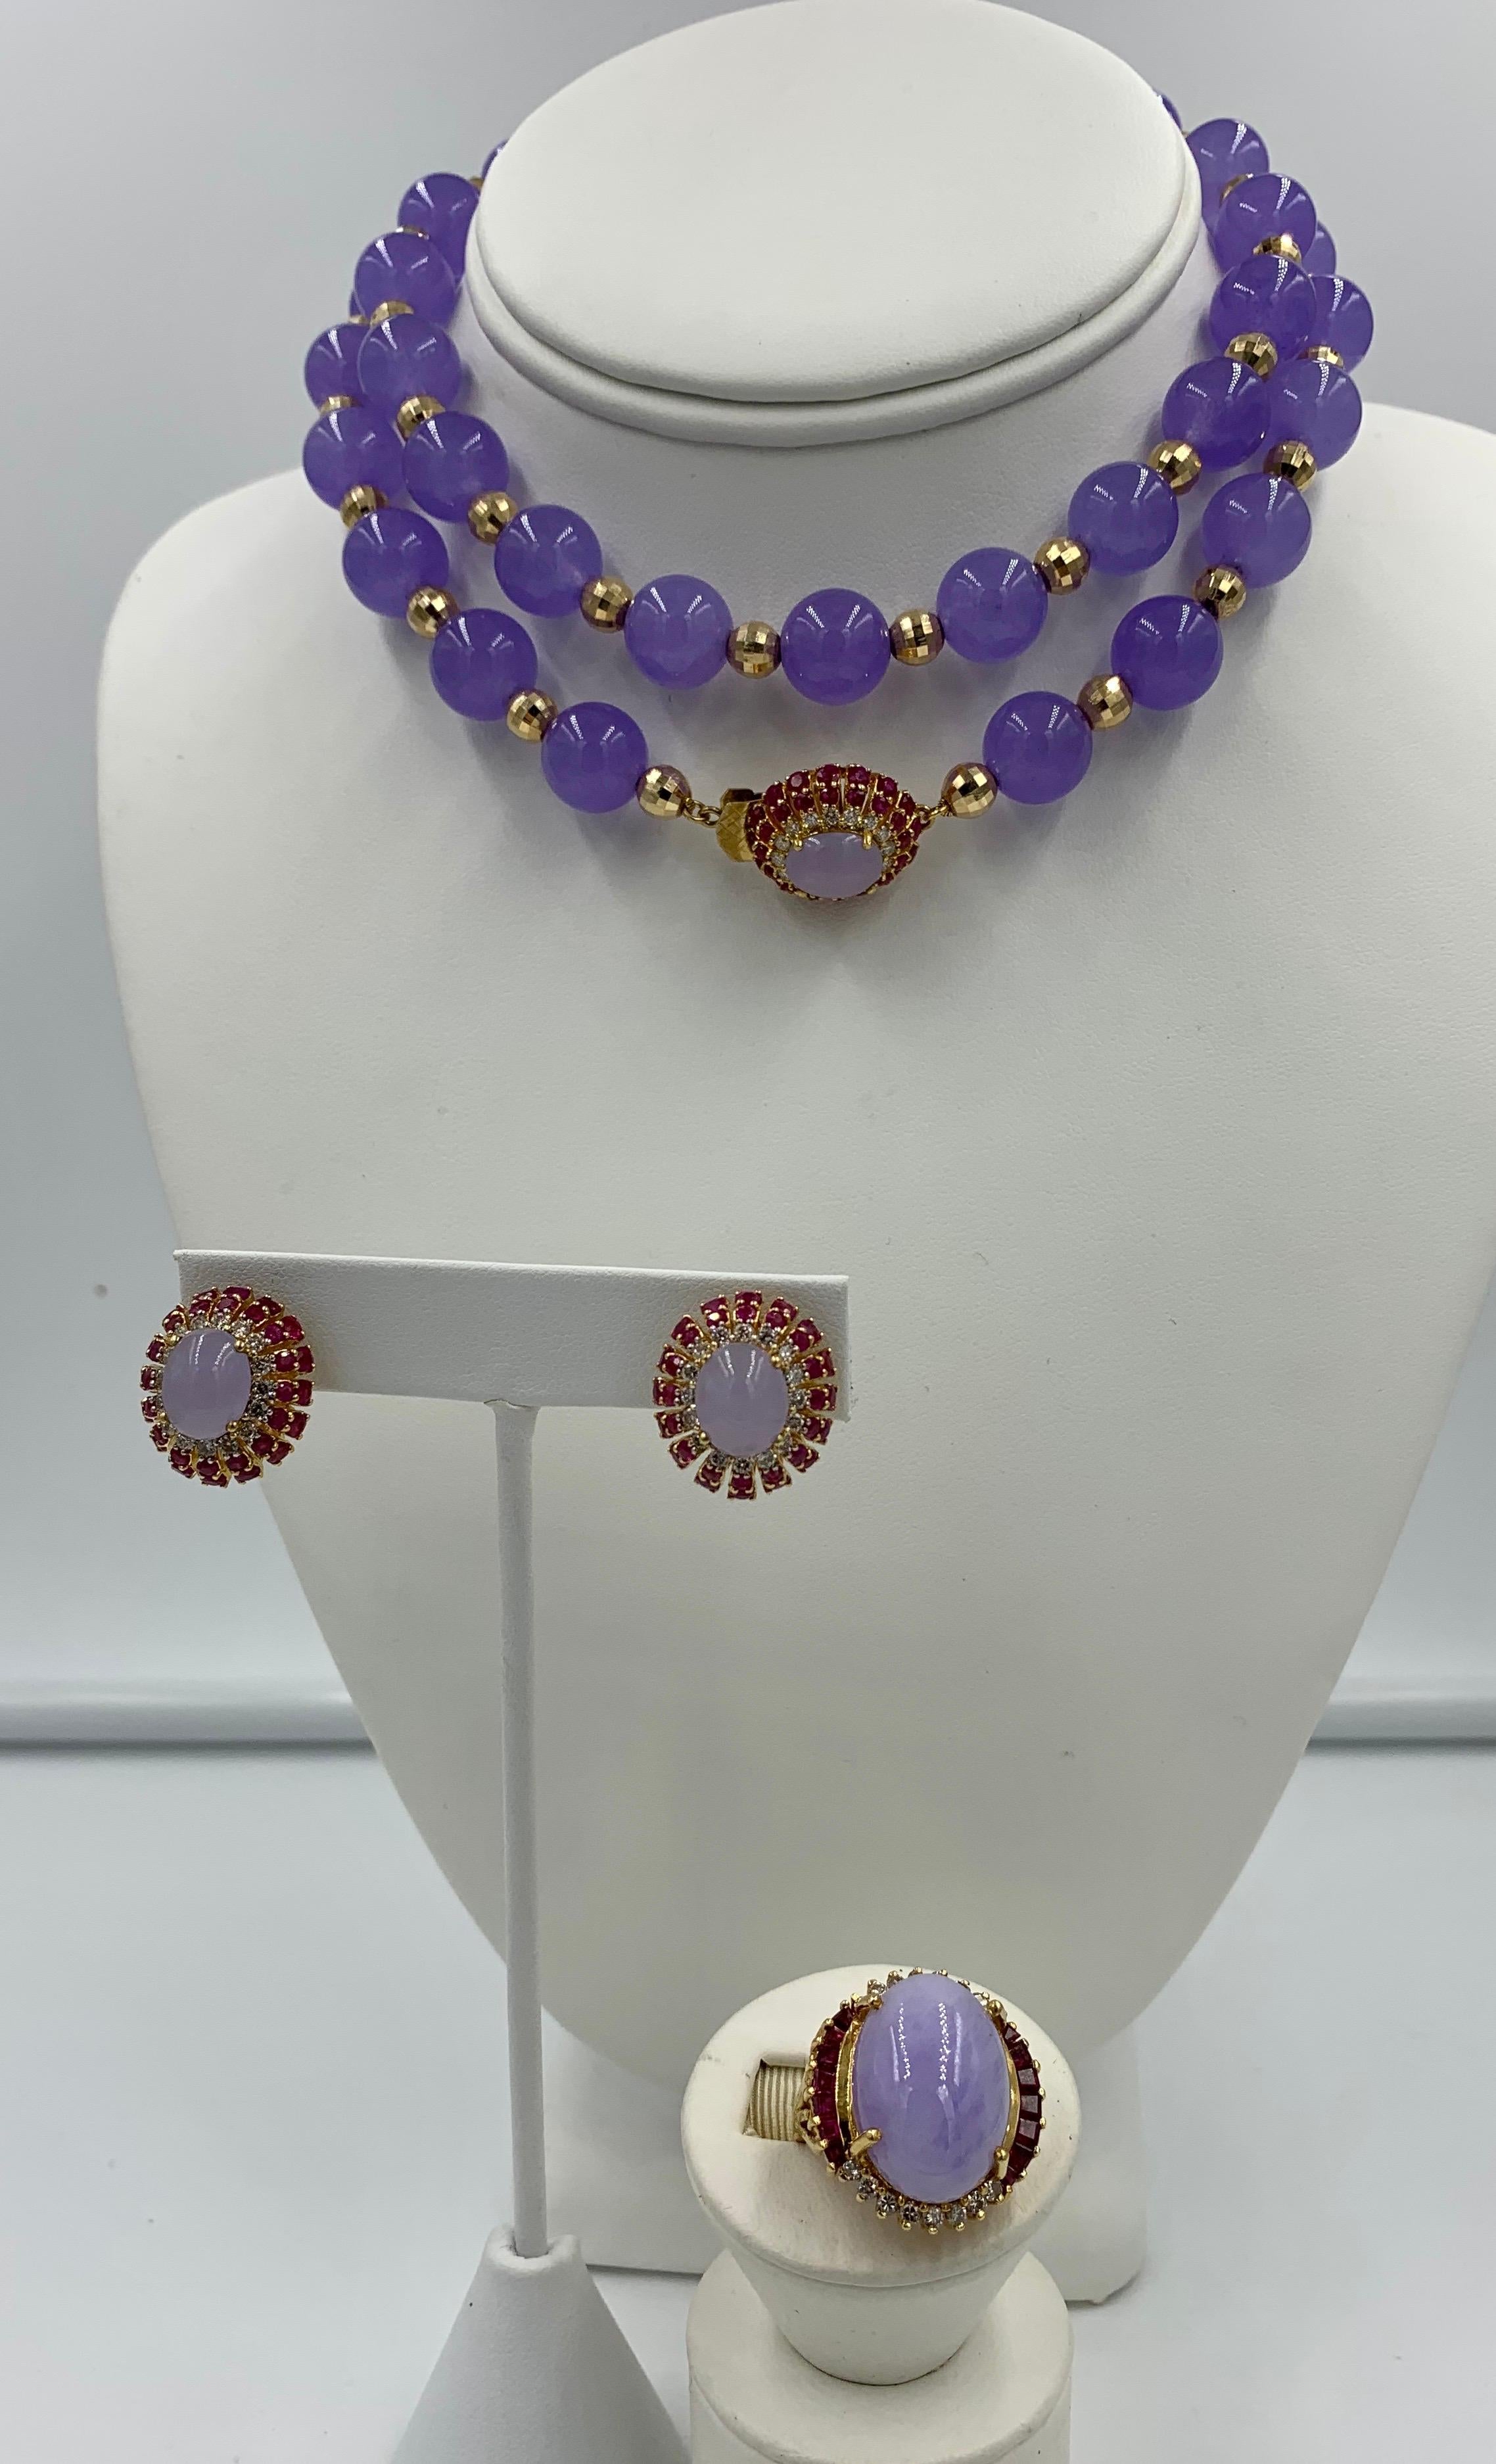 A spectacular Lavender Jade, Ruby, Diamond Suite.   The suite comprising a necklace, earrings and ring each with gorgeous Lavender Jade oval cabochons with a 17 Carat Jade Cabochon in the ring.  The Jade cabochons are surrounded by 1.25 Carats of